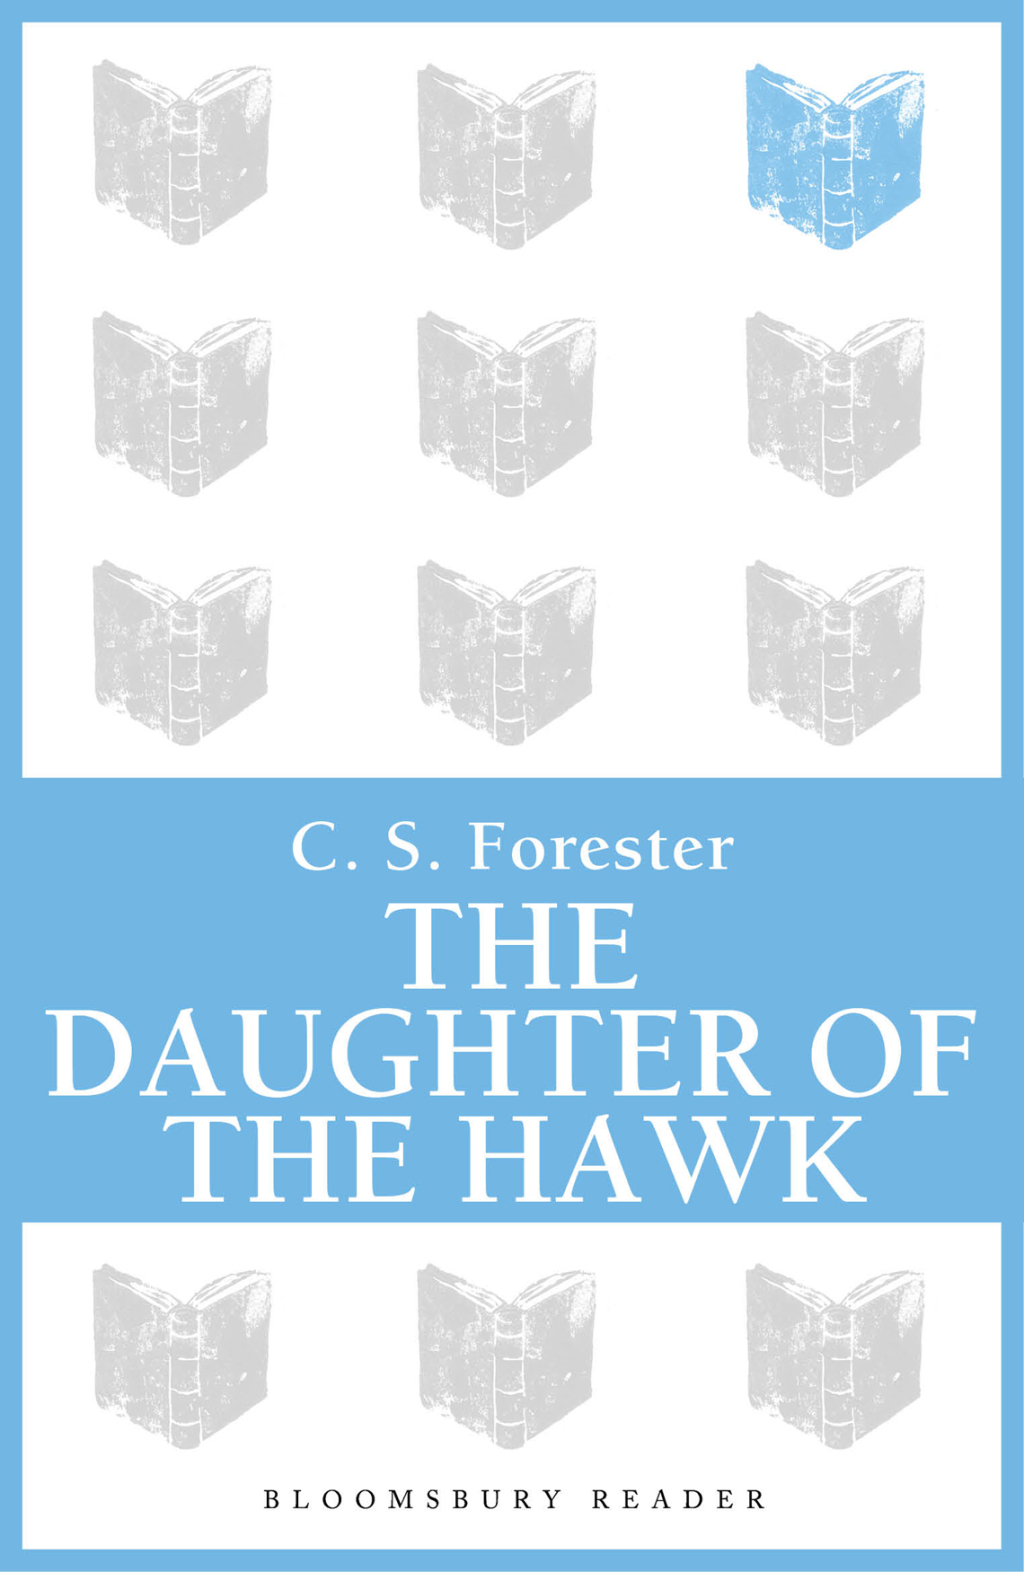 The Daughter of the Hawk C. S. Forester Author